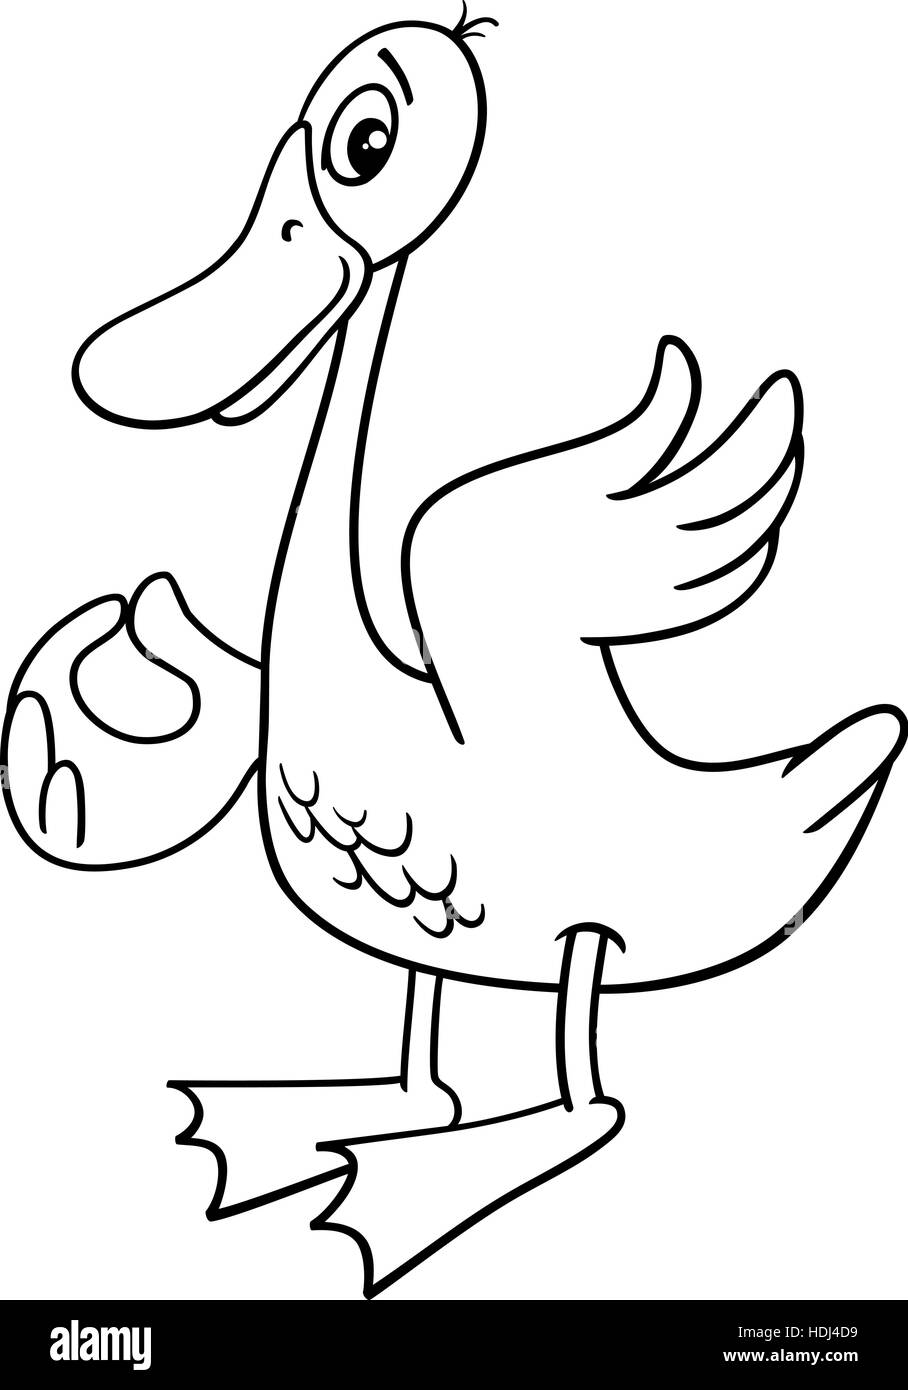 Black and White Cartoon Illustration of Goose Bird Farm Animal Character Coloring Page Stock Vector